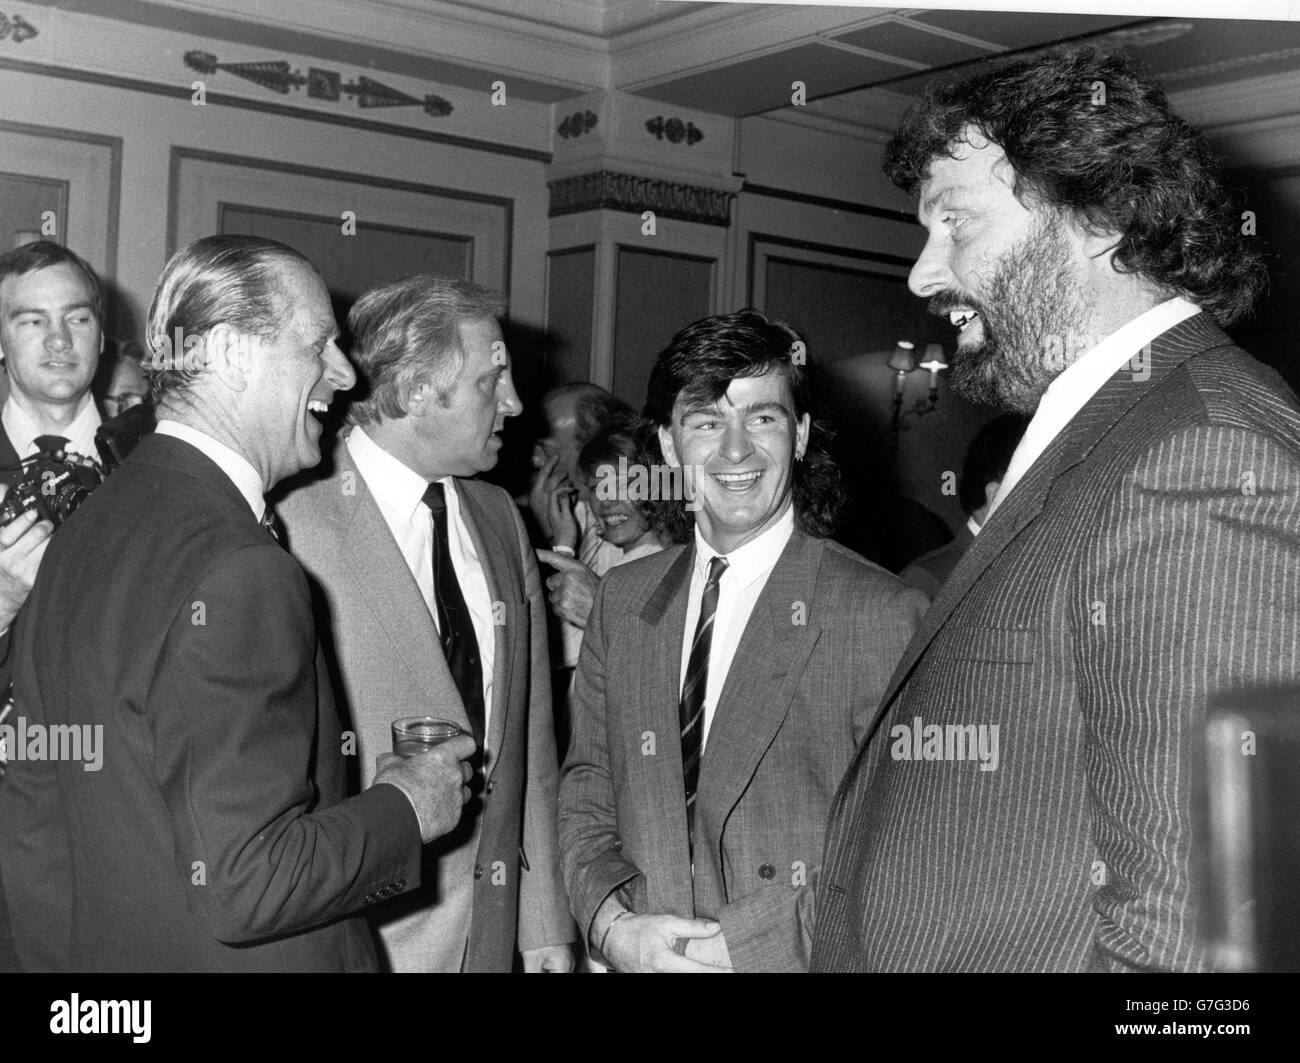 The Duke of Edinburgh at the National Sponspored Sports luncheon, organised by The Variety Club of Great Britain, at the Cafe Royal, London. The Duke enjoys chatting with (l-r) strongman Geoff Capes and footballer Charlie Nicholas. *Scanned low-res from print, high-res available on request* Stock Photo